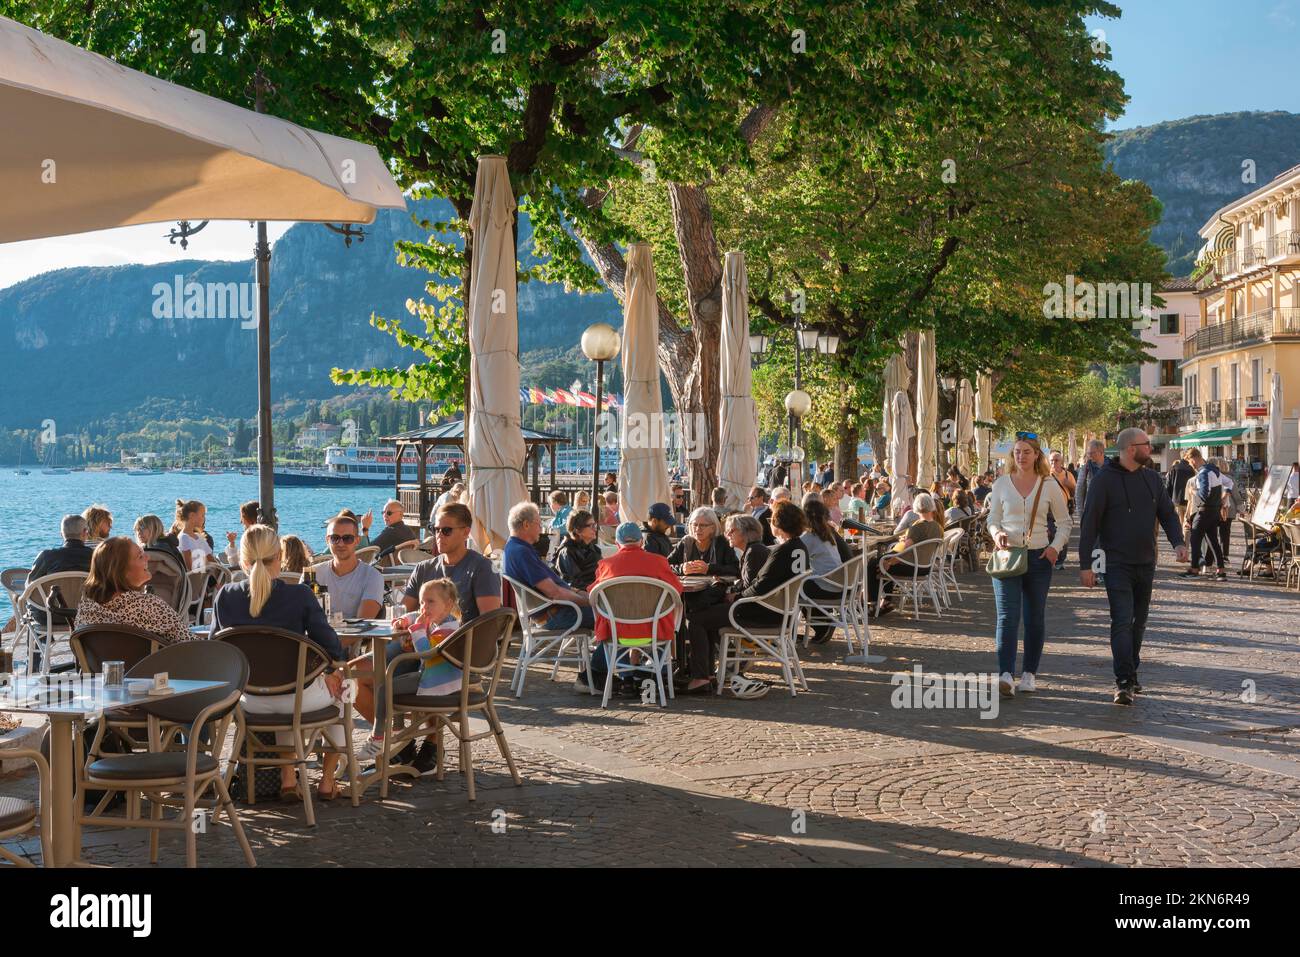 Lake Garda Italy, view of people relaxing at cafe tables sited along the waterfront in the scenic old town area of Garda town, Lake Garda, Veneto Stock Photo